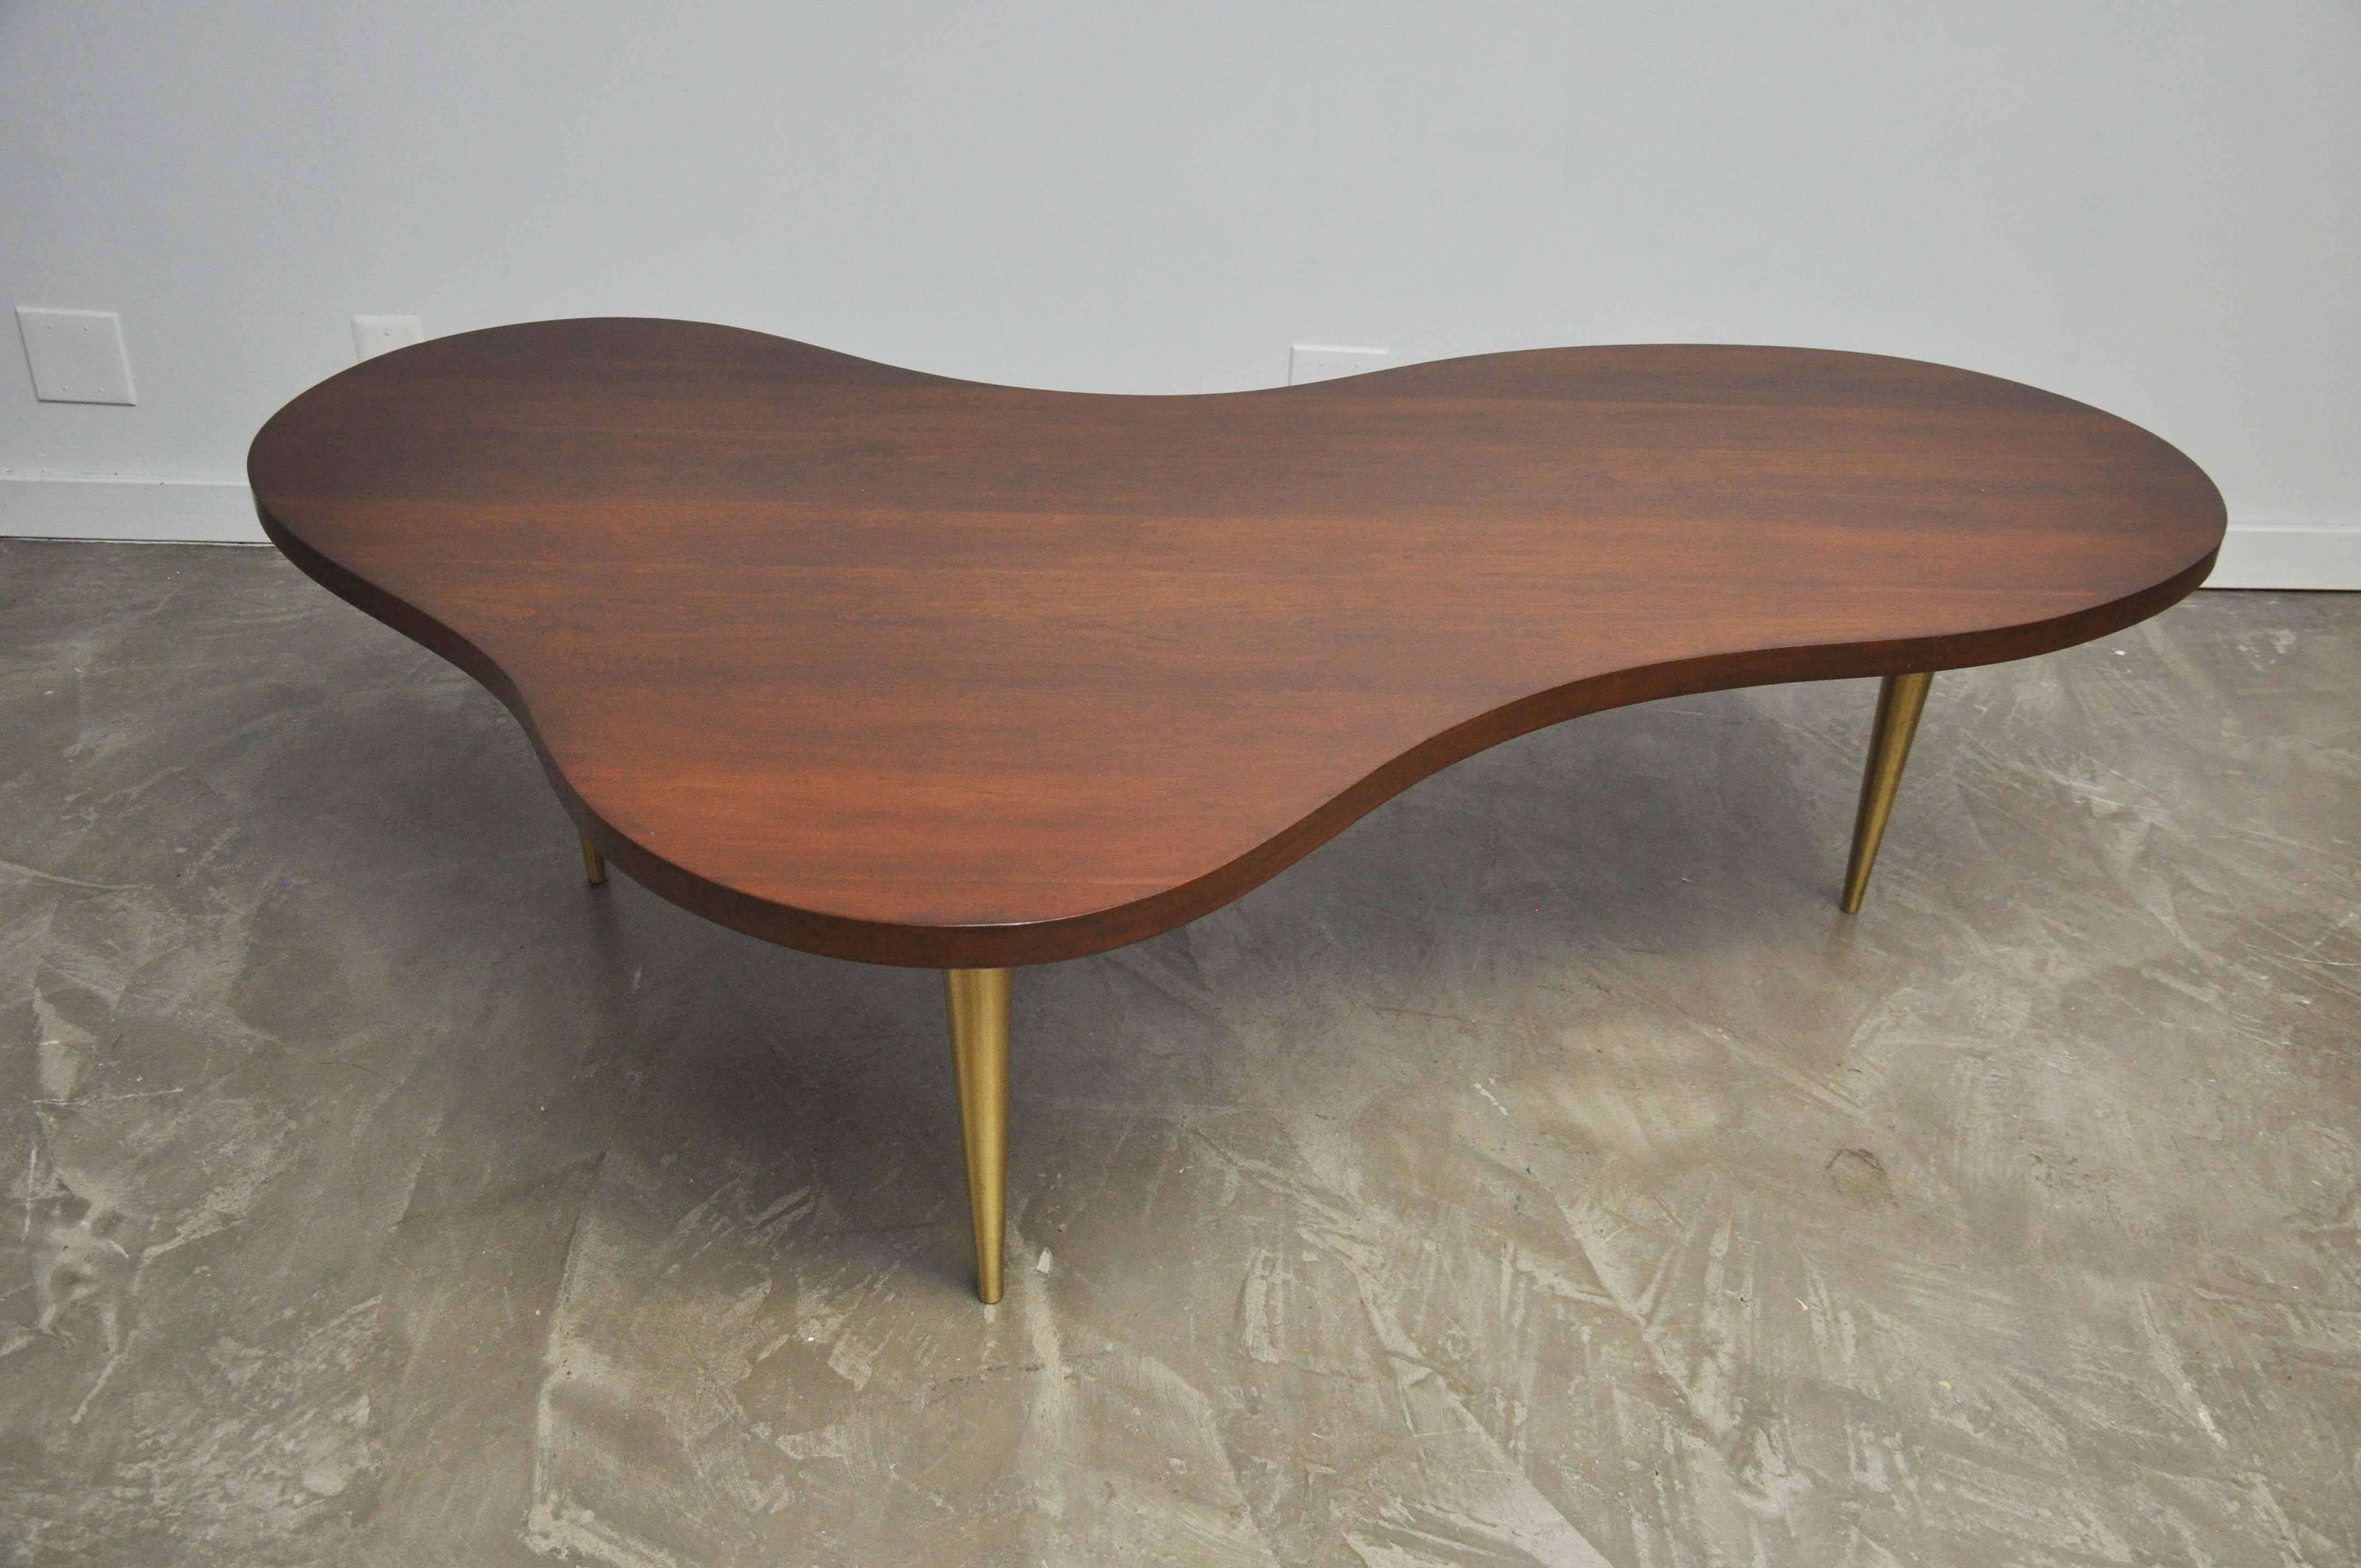 Monumental Biomorphic Walnut and Brass Table by T.H. Robsjohn-Gibbings 1